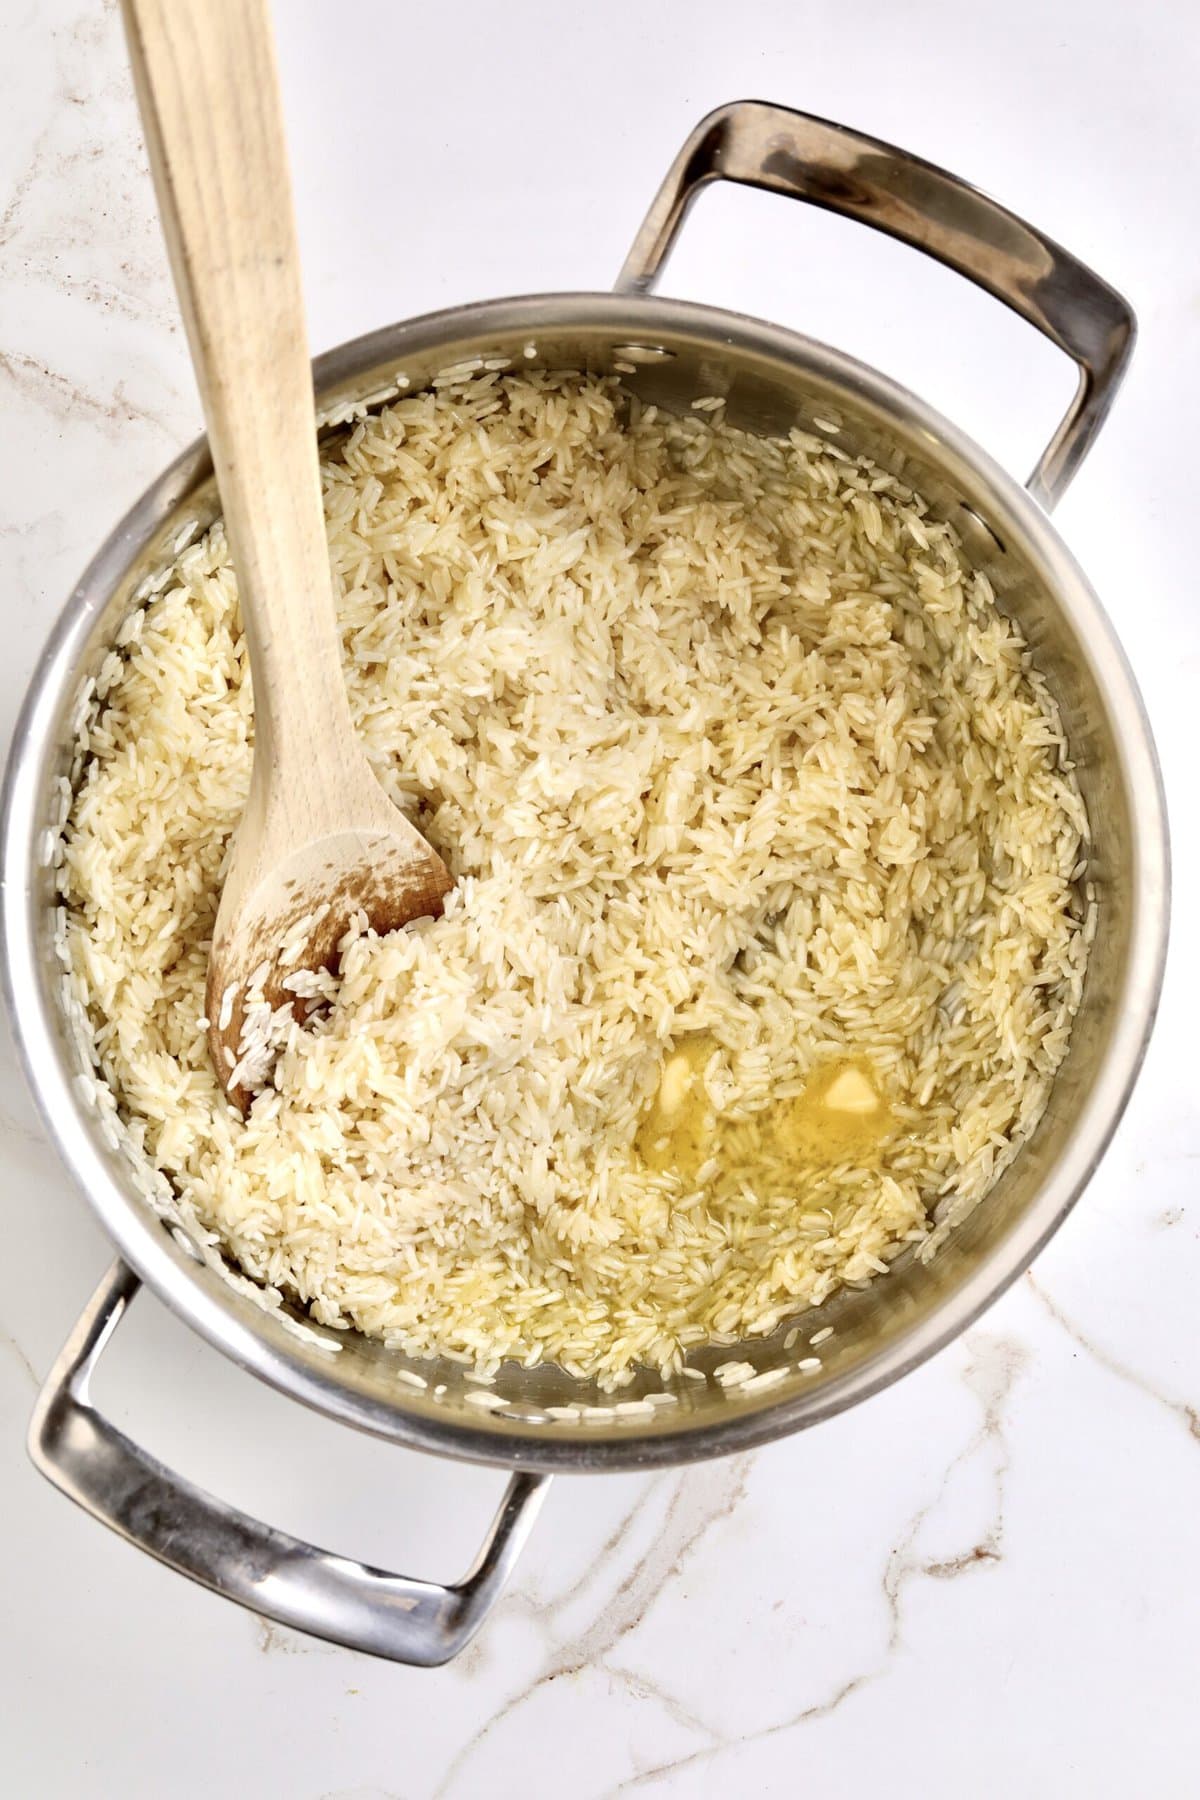 How to make Creamy Parmesan Rice Recipe (Quick and Easy Side): adding the butter and rice to the pan to toast before steaming rice.